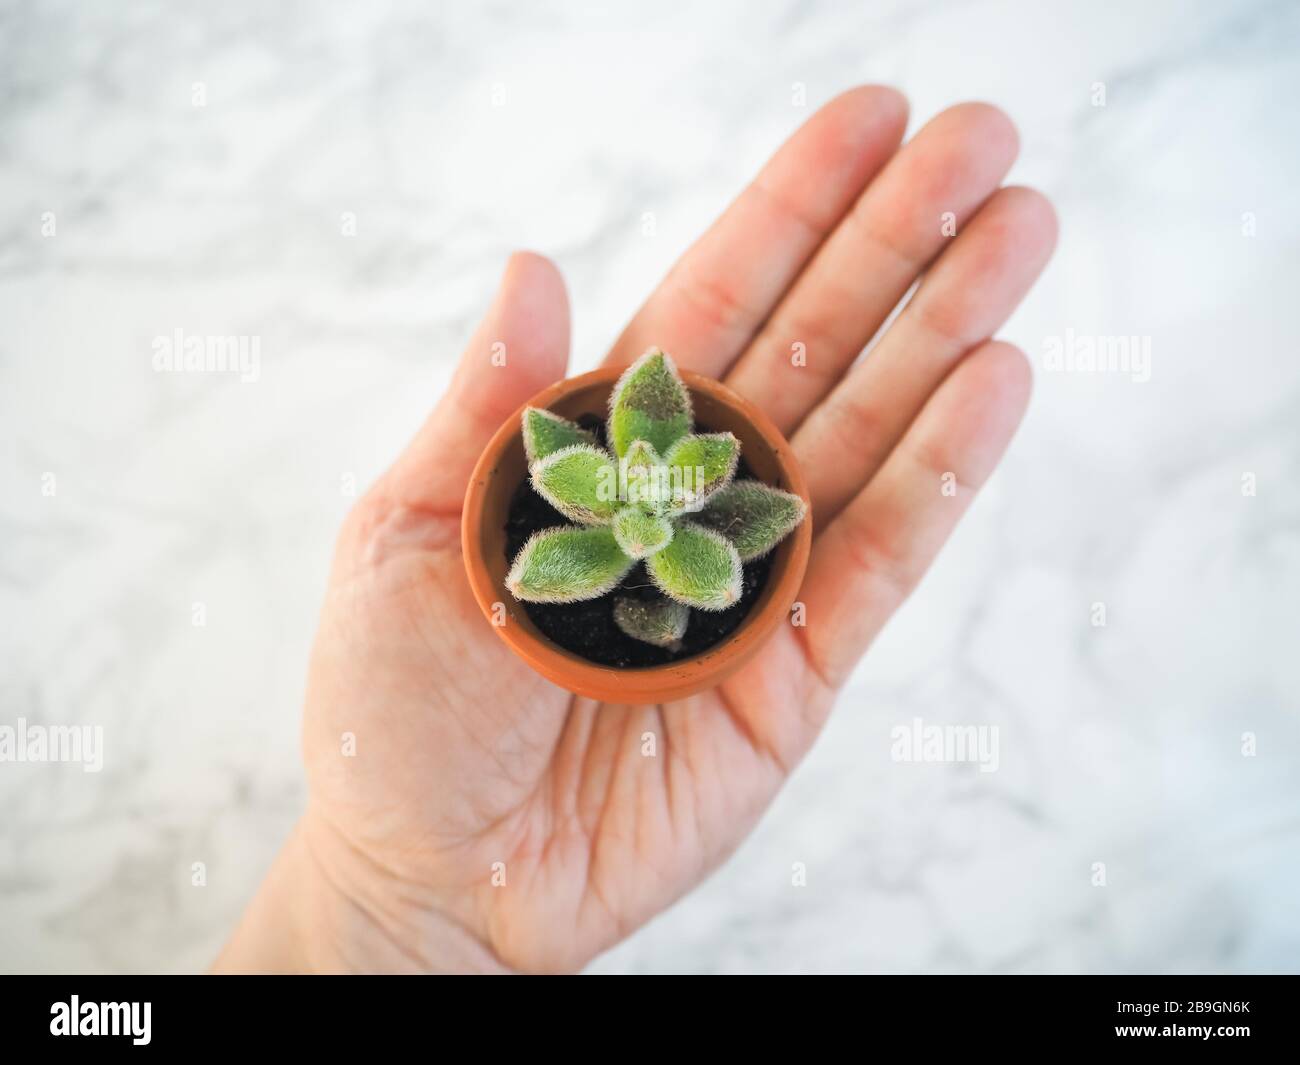 Caucasian hand holding a small terracotta pot with young echeveria setosa, a hairy evergreen succulent, against a white background Stock Photo